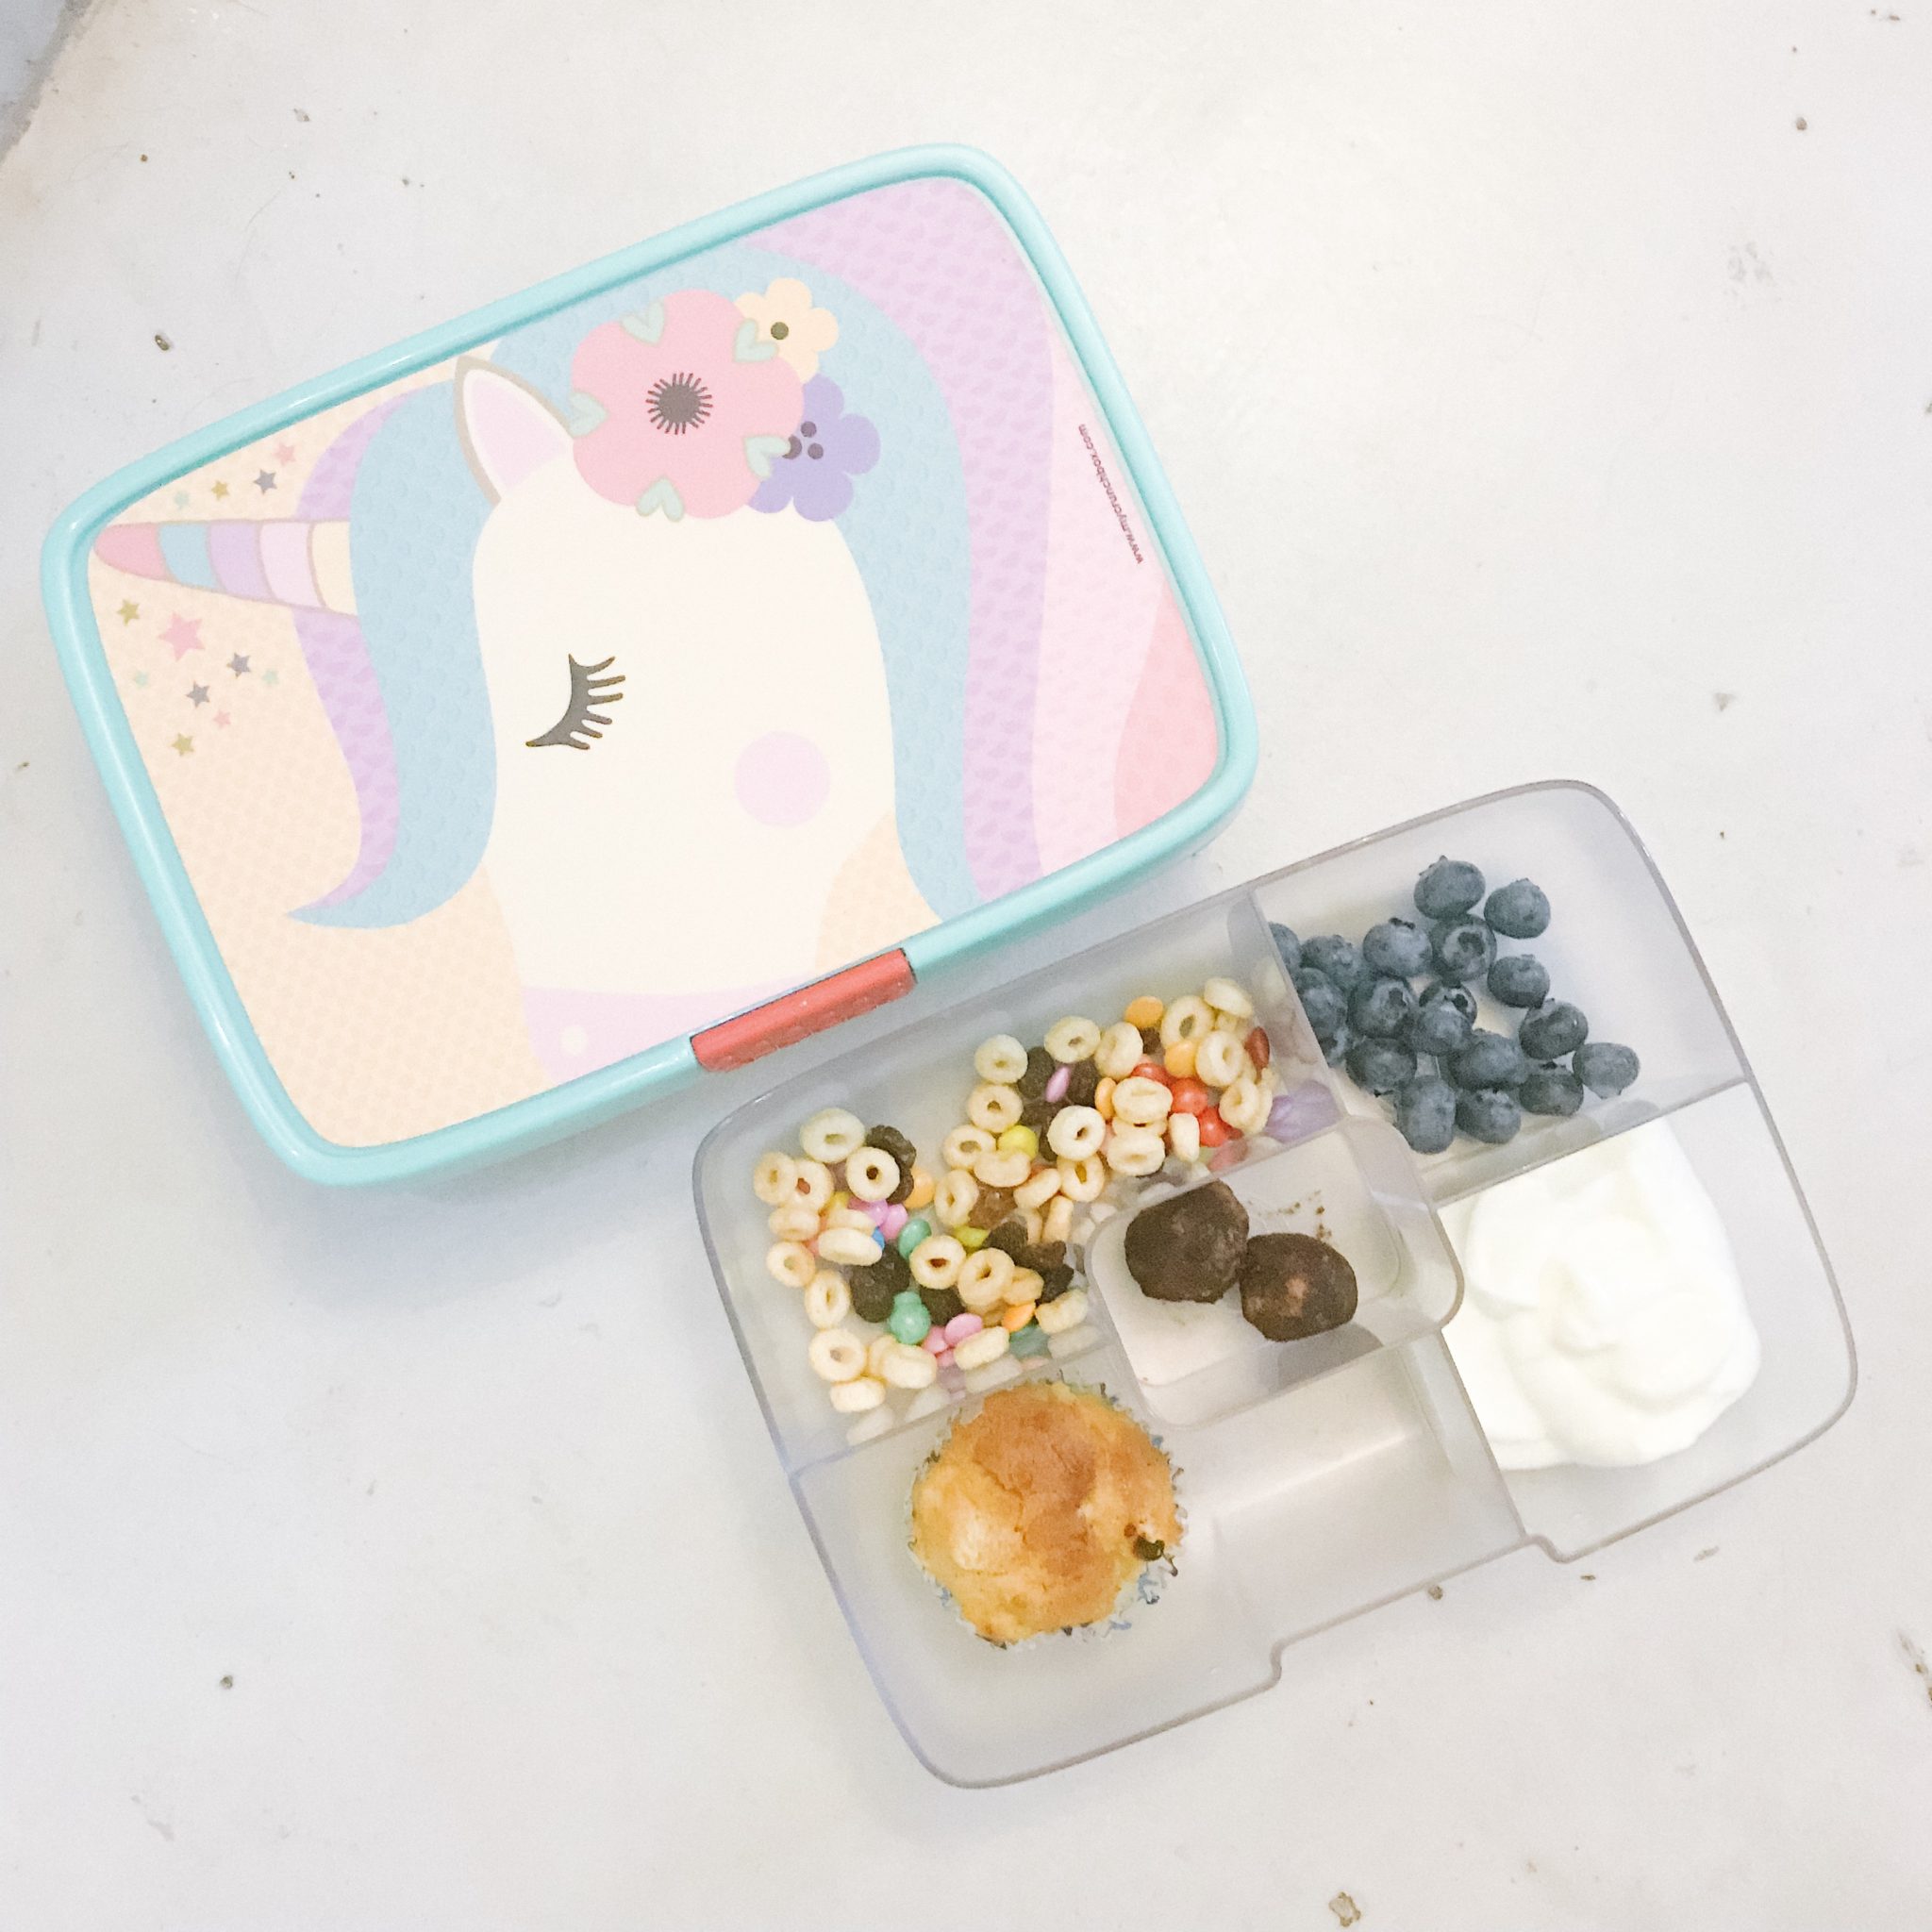 Bento box, packing lunch, healthy, snack